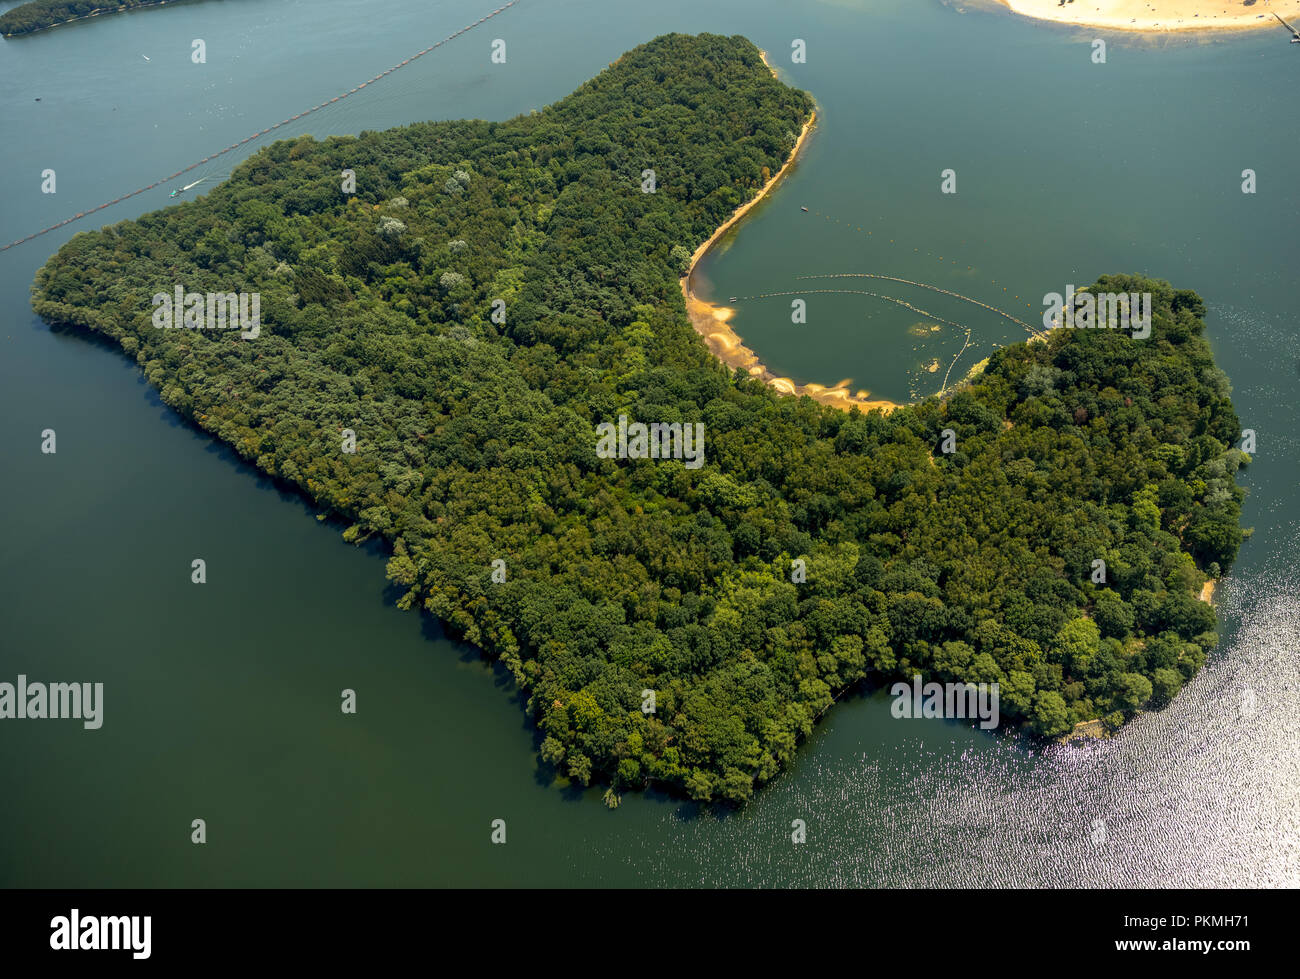 Aerial view, Green lake island, deciduous forest on the island in Halterner Stausee, Haltern am See, Ruhr area Stock Photo